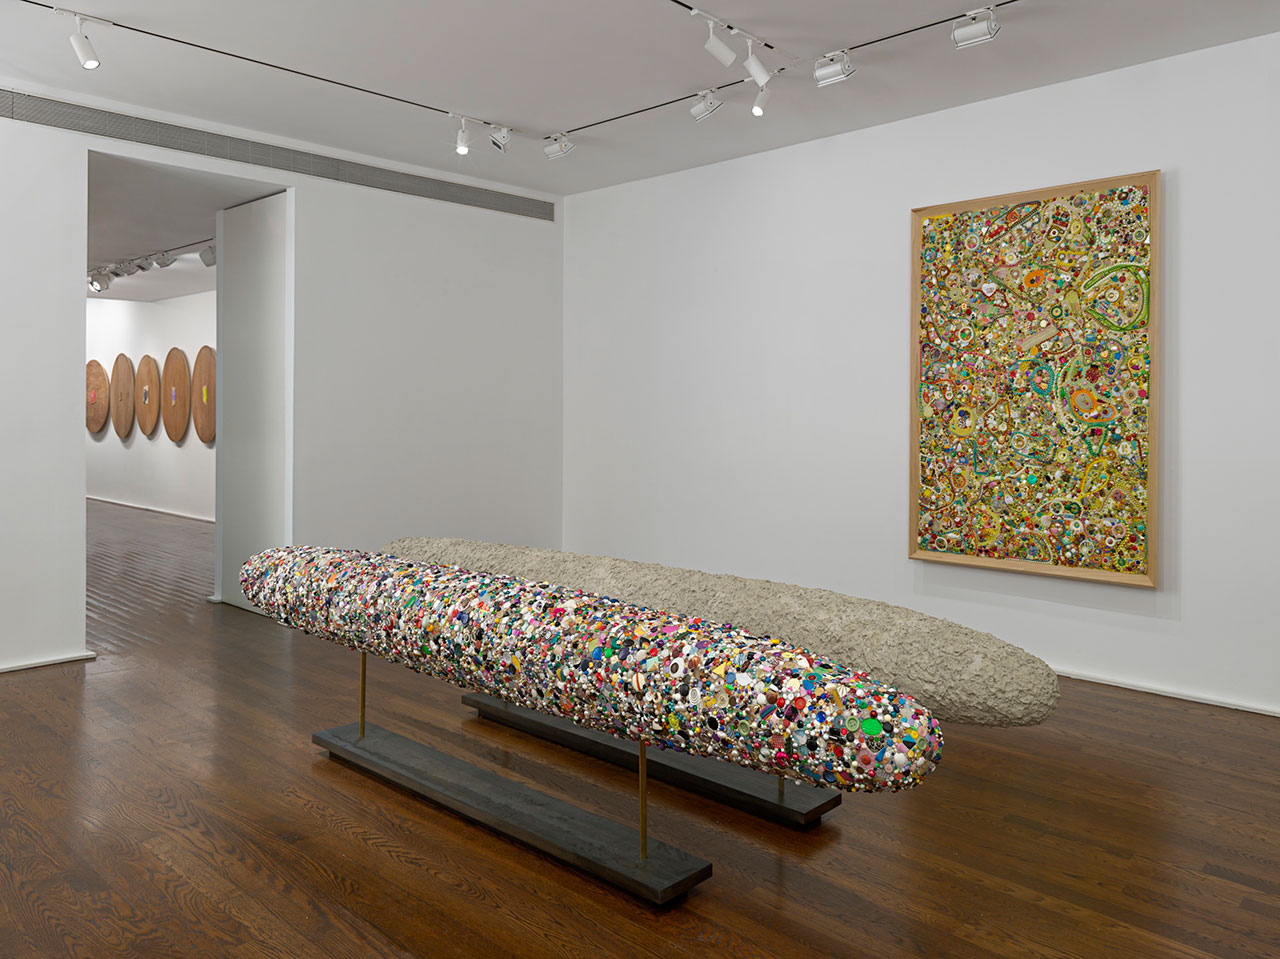 Installation view, Mike Kelley. Memory Ware, Hauser &amp; Wirth New York, 2016. Art © Mike Kelley Foundation for the Arts. All Rights Reserved / Licensed by VAGA, New York, NY. Courtesy the Foundation and Hauser &amp; Wirth. Photo by Genevieve Hanson.